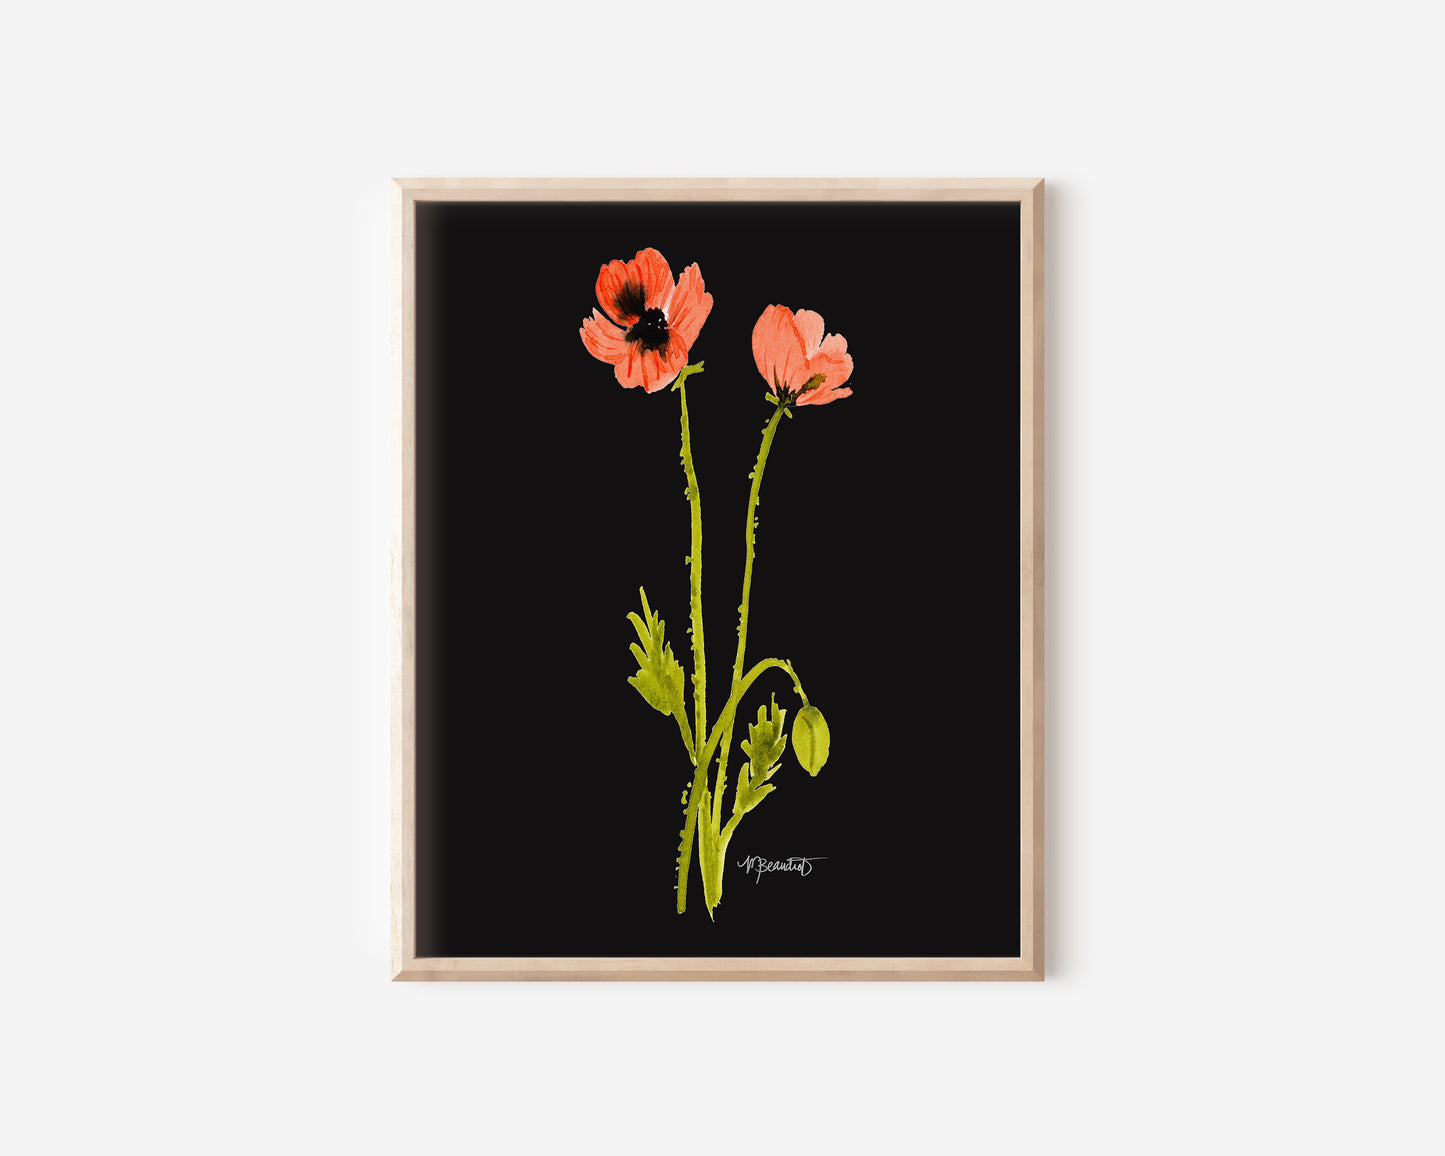 A Pair of Dancing Poppy Stems in Midnight